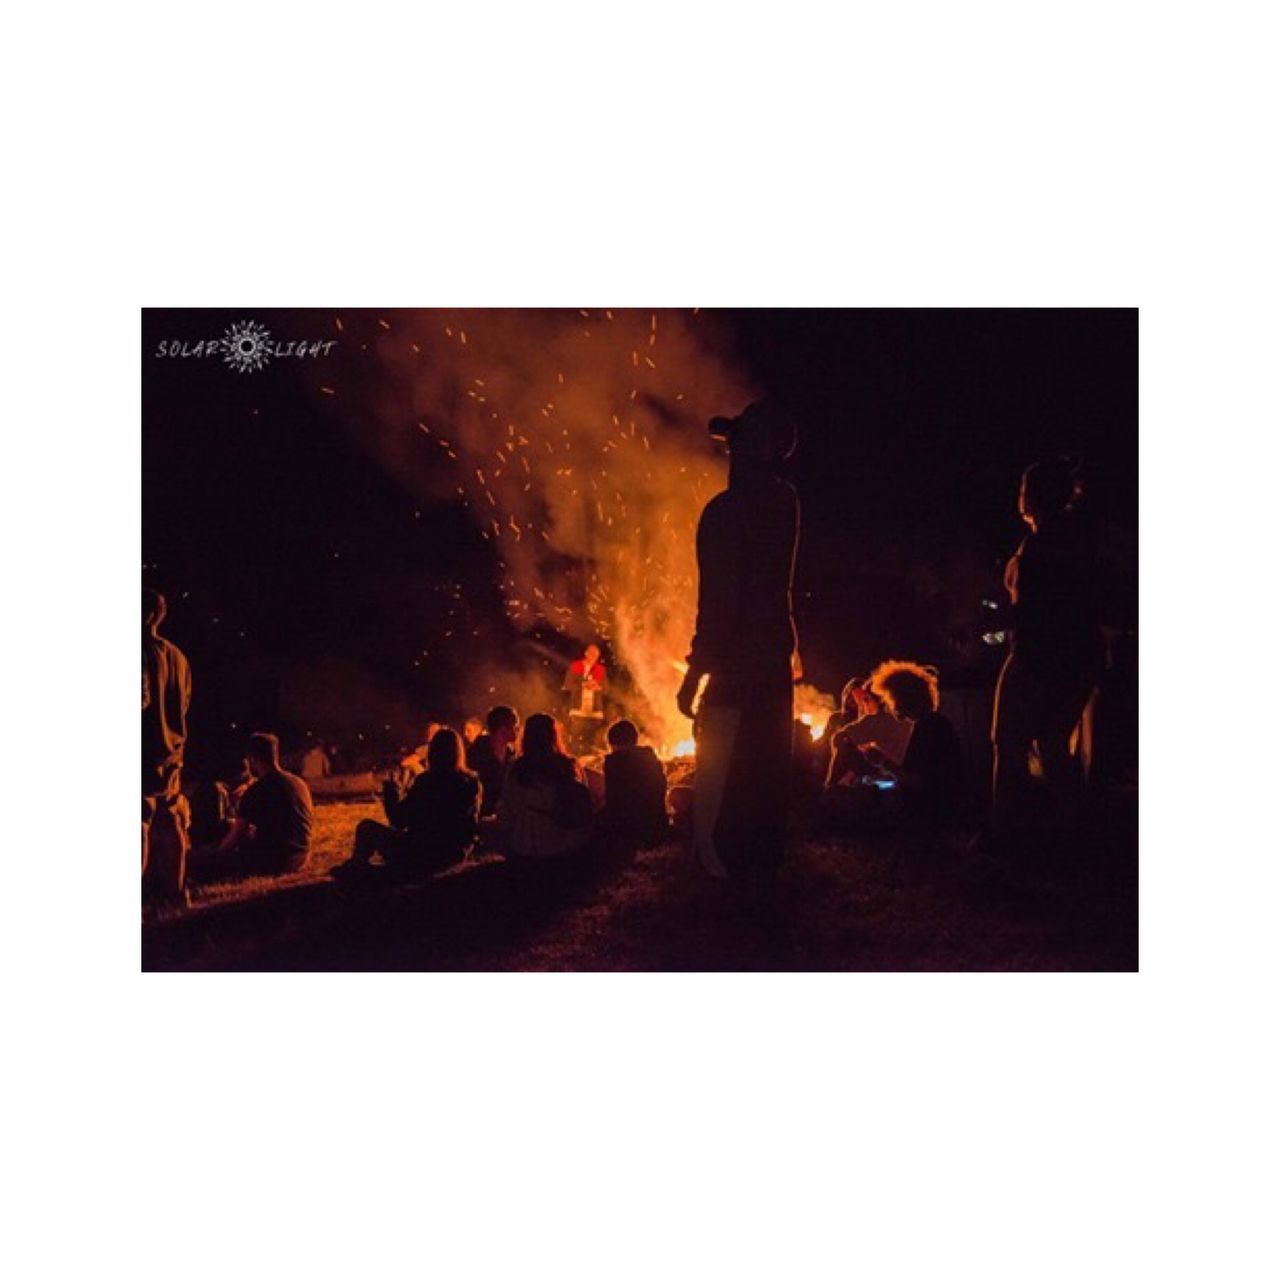 burning, copy space, auto post production filter, fire, transfer print, men, indoors, fire - natural phenomenon, studio shot, people, frame, photography themes, flame, group of people, night, communication, close-up, picture frame, arts culture and entertainment, digital composite